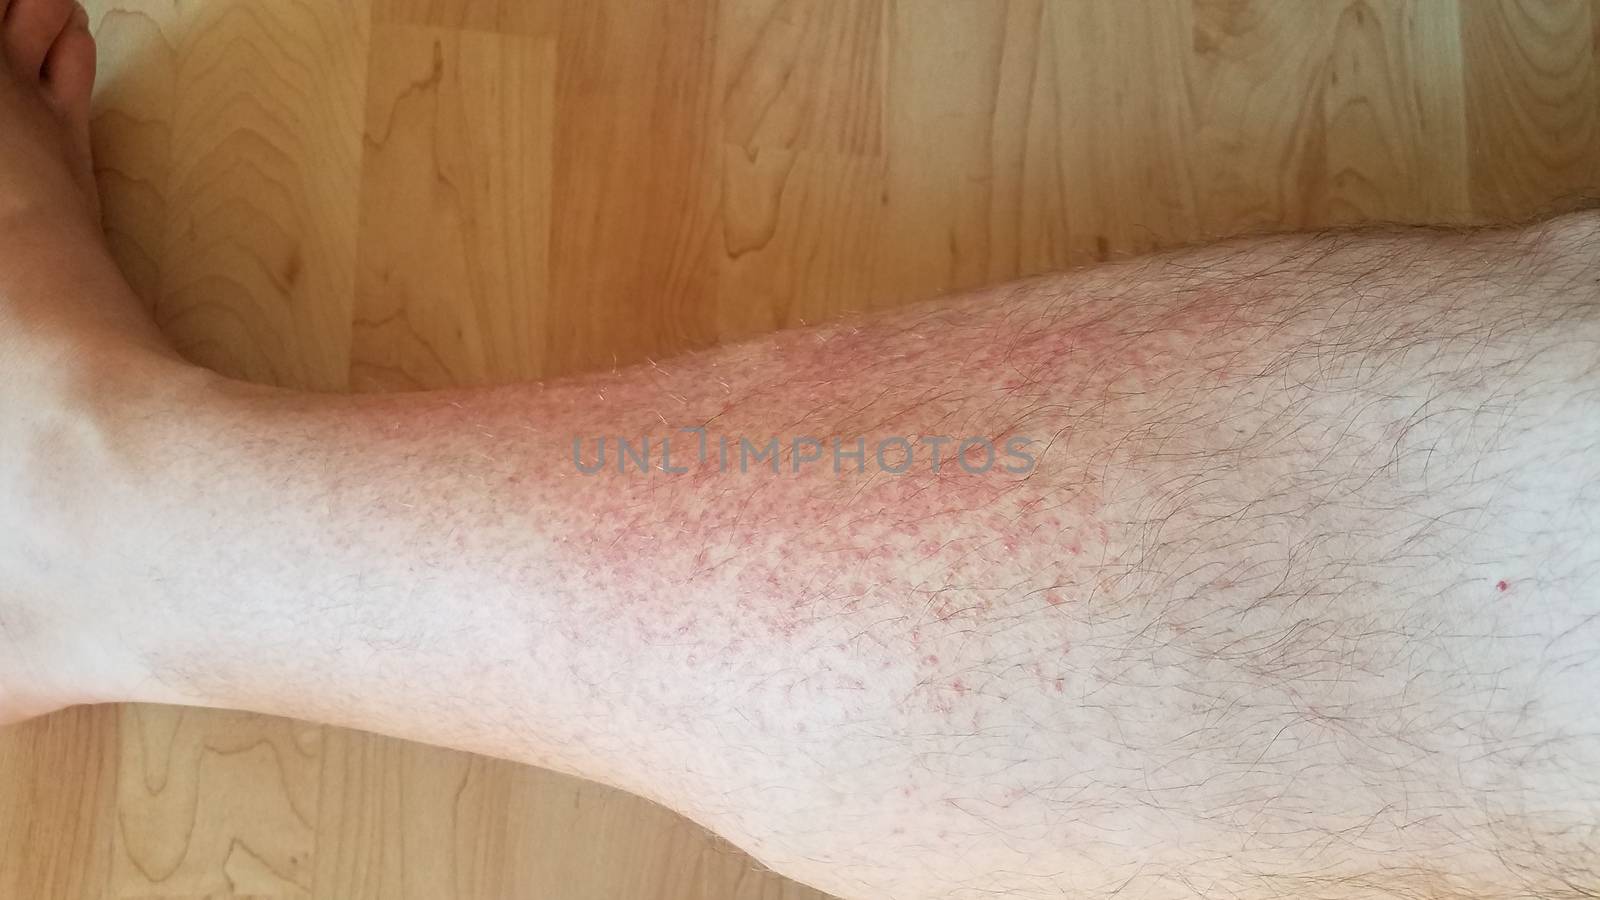 red inflammation dots on man's leg with hair by stockphotofan1